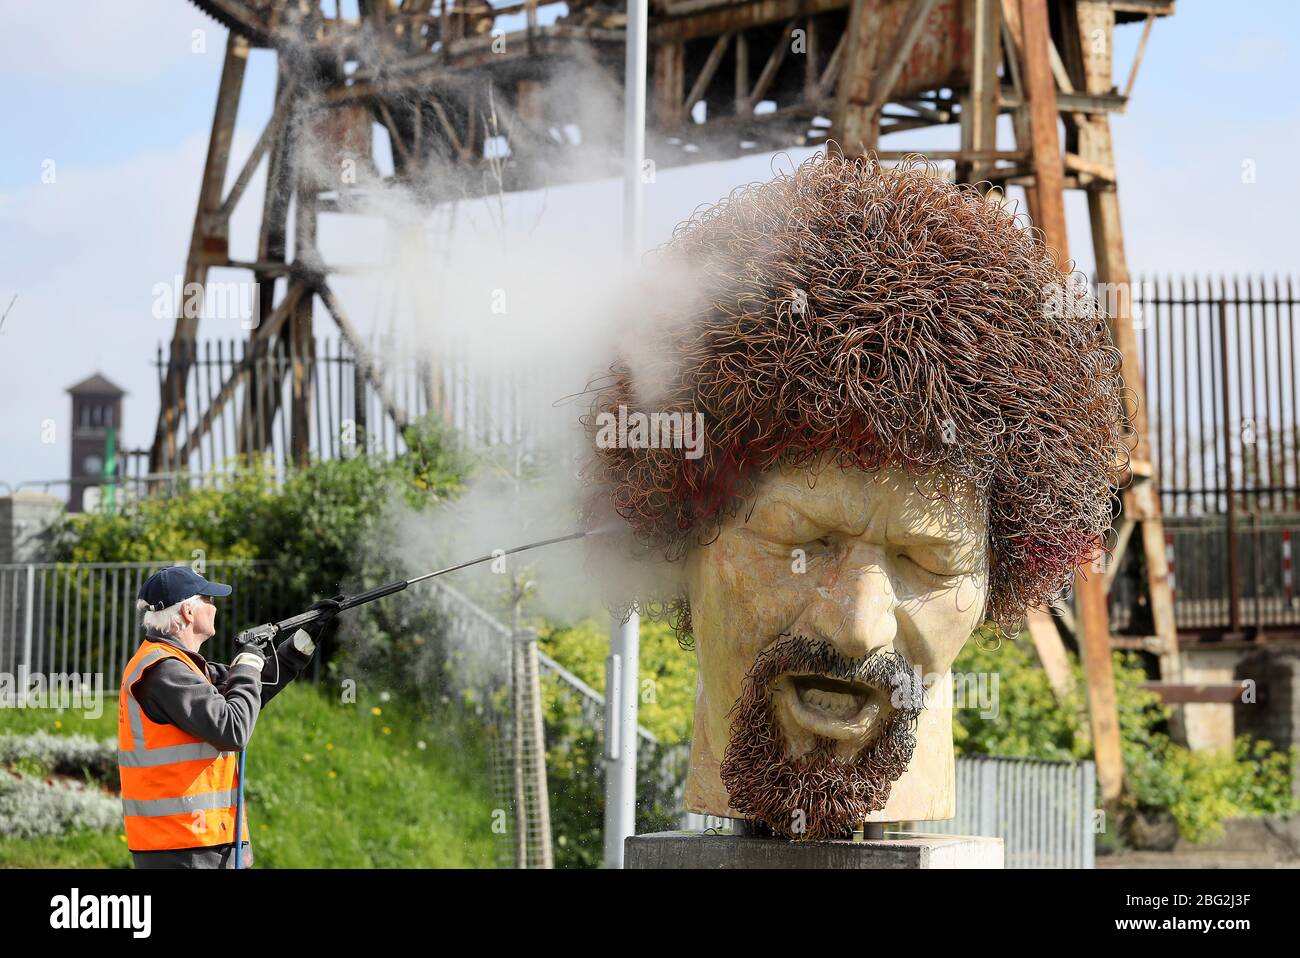 Ross Sheridan of P.Mac Cleaning and Restoration services working on behalf of Dublin City Council cleans a statue of the late musician Luke Kelly in the Sherriff street area of Dublin, after it was defaced for the fourth time in the past year. Stock Photo